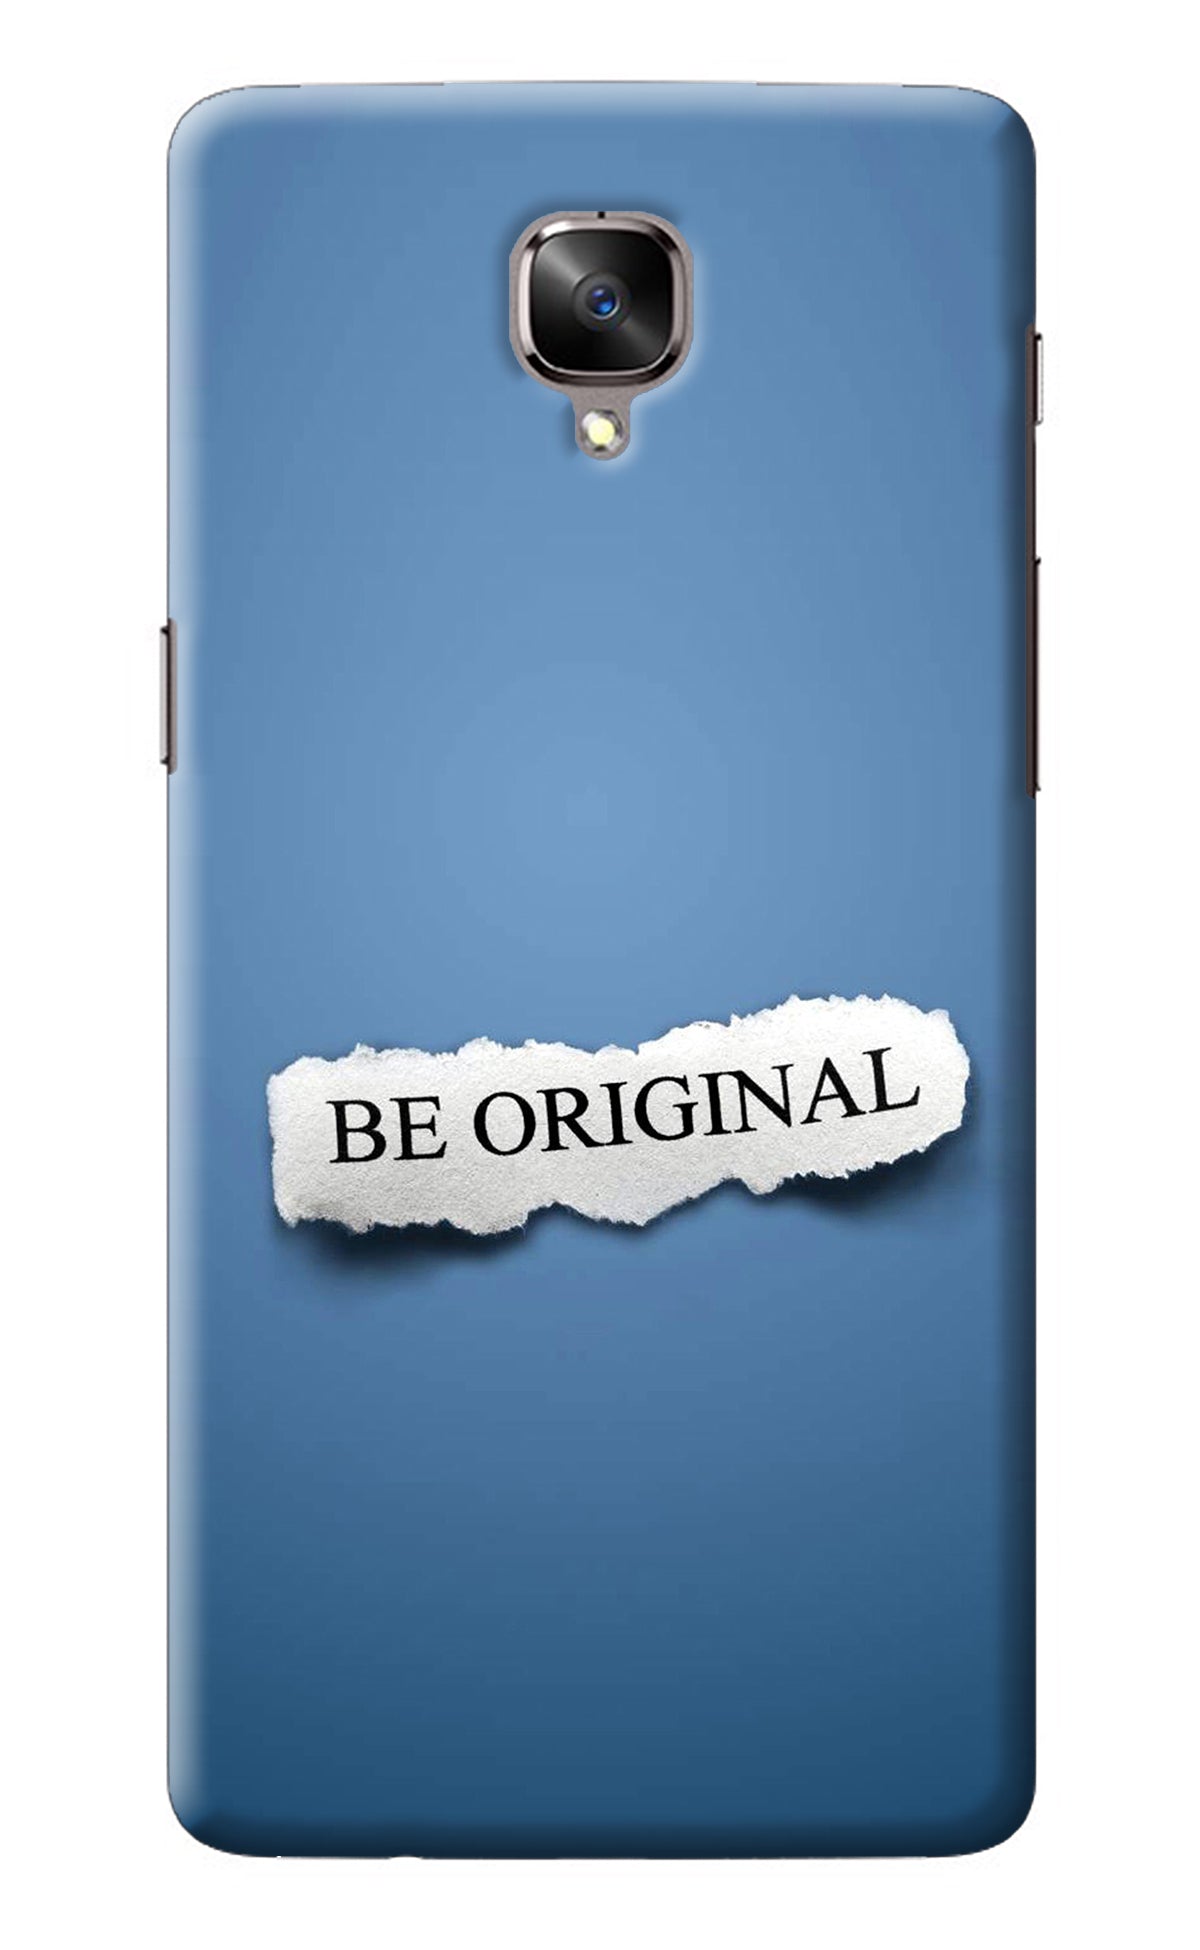 Be Original Oneplus 3/3T Back Cover